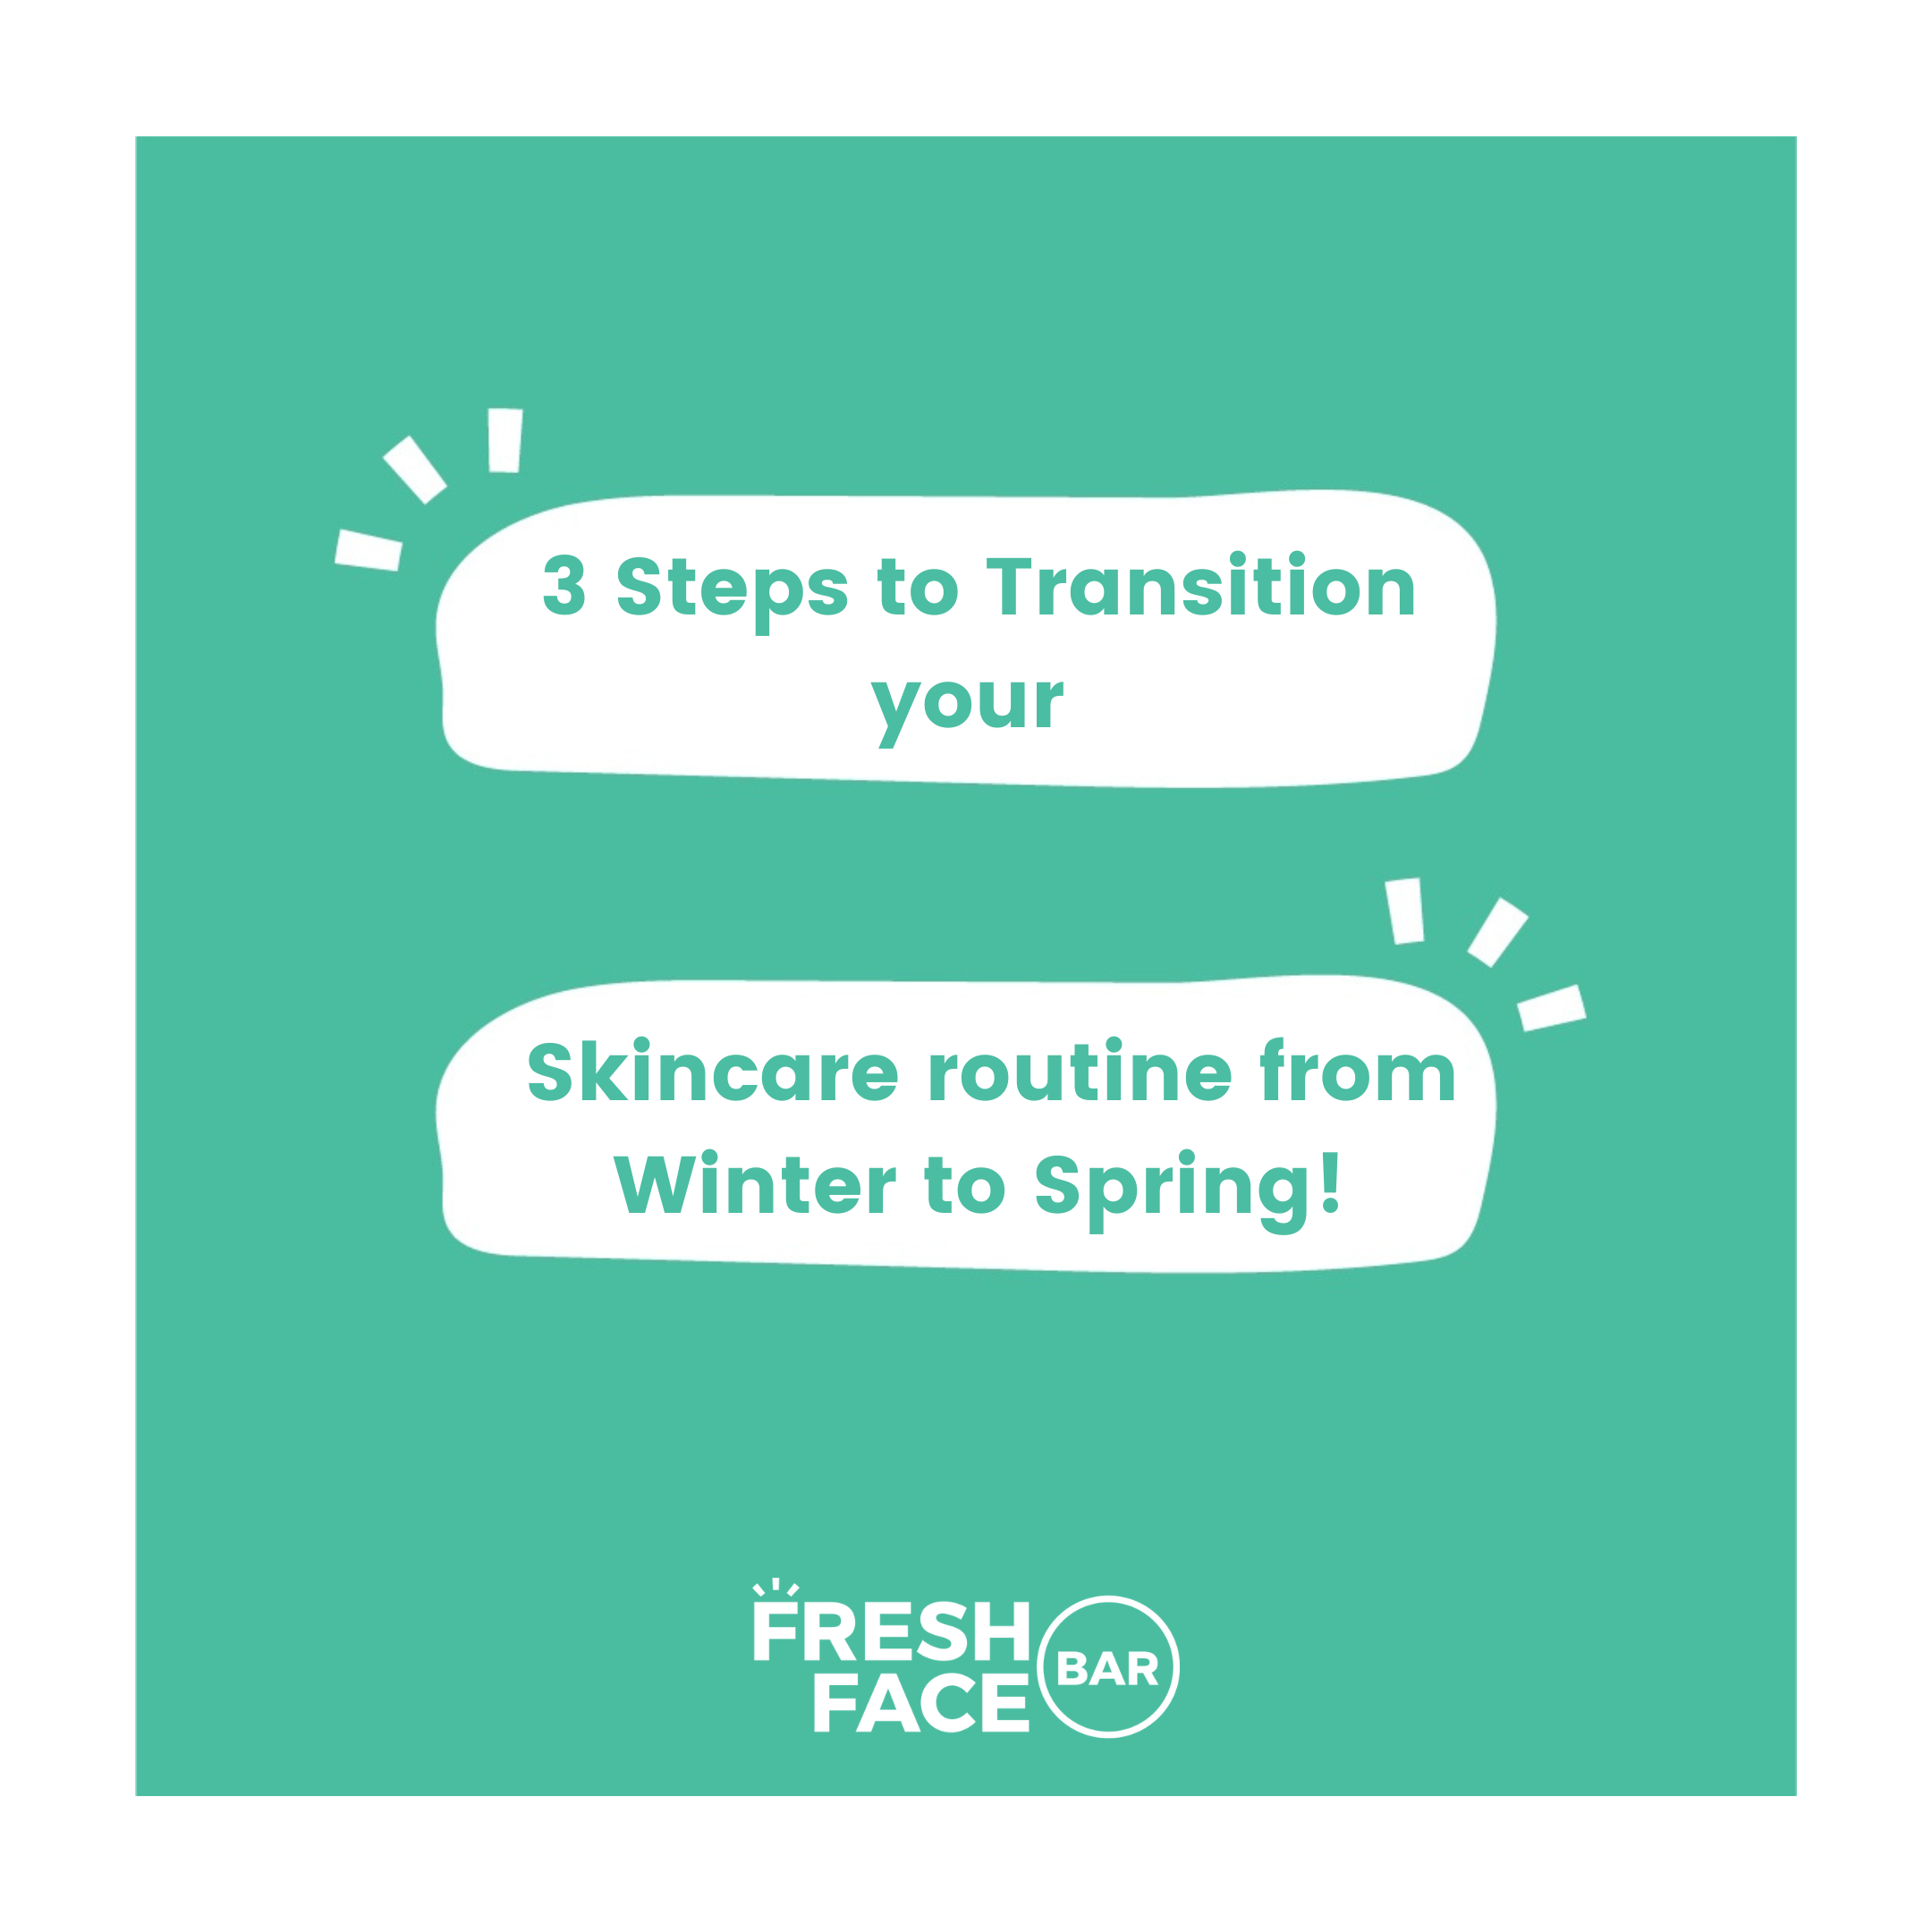 3 Steps to Transition your Skincare routine from Winter to Spring!